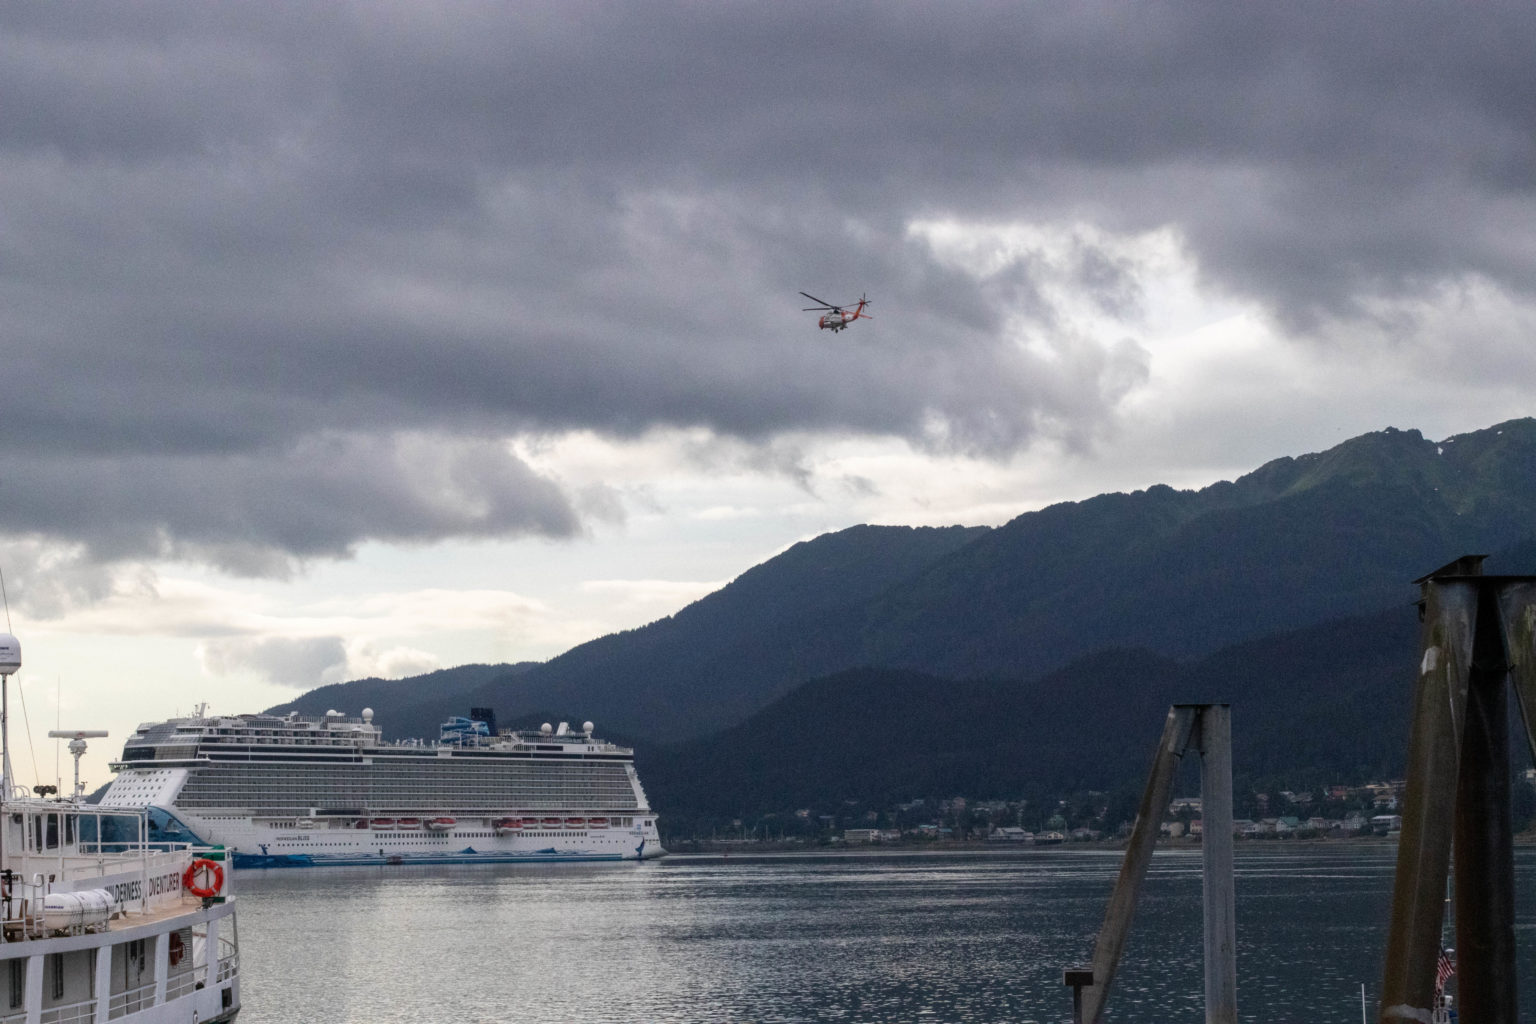 a helicopter flies near a cruise ship on an overcast day